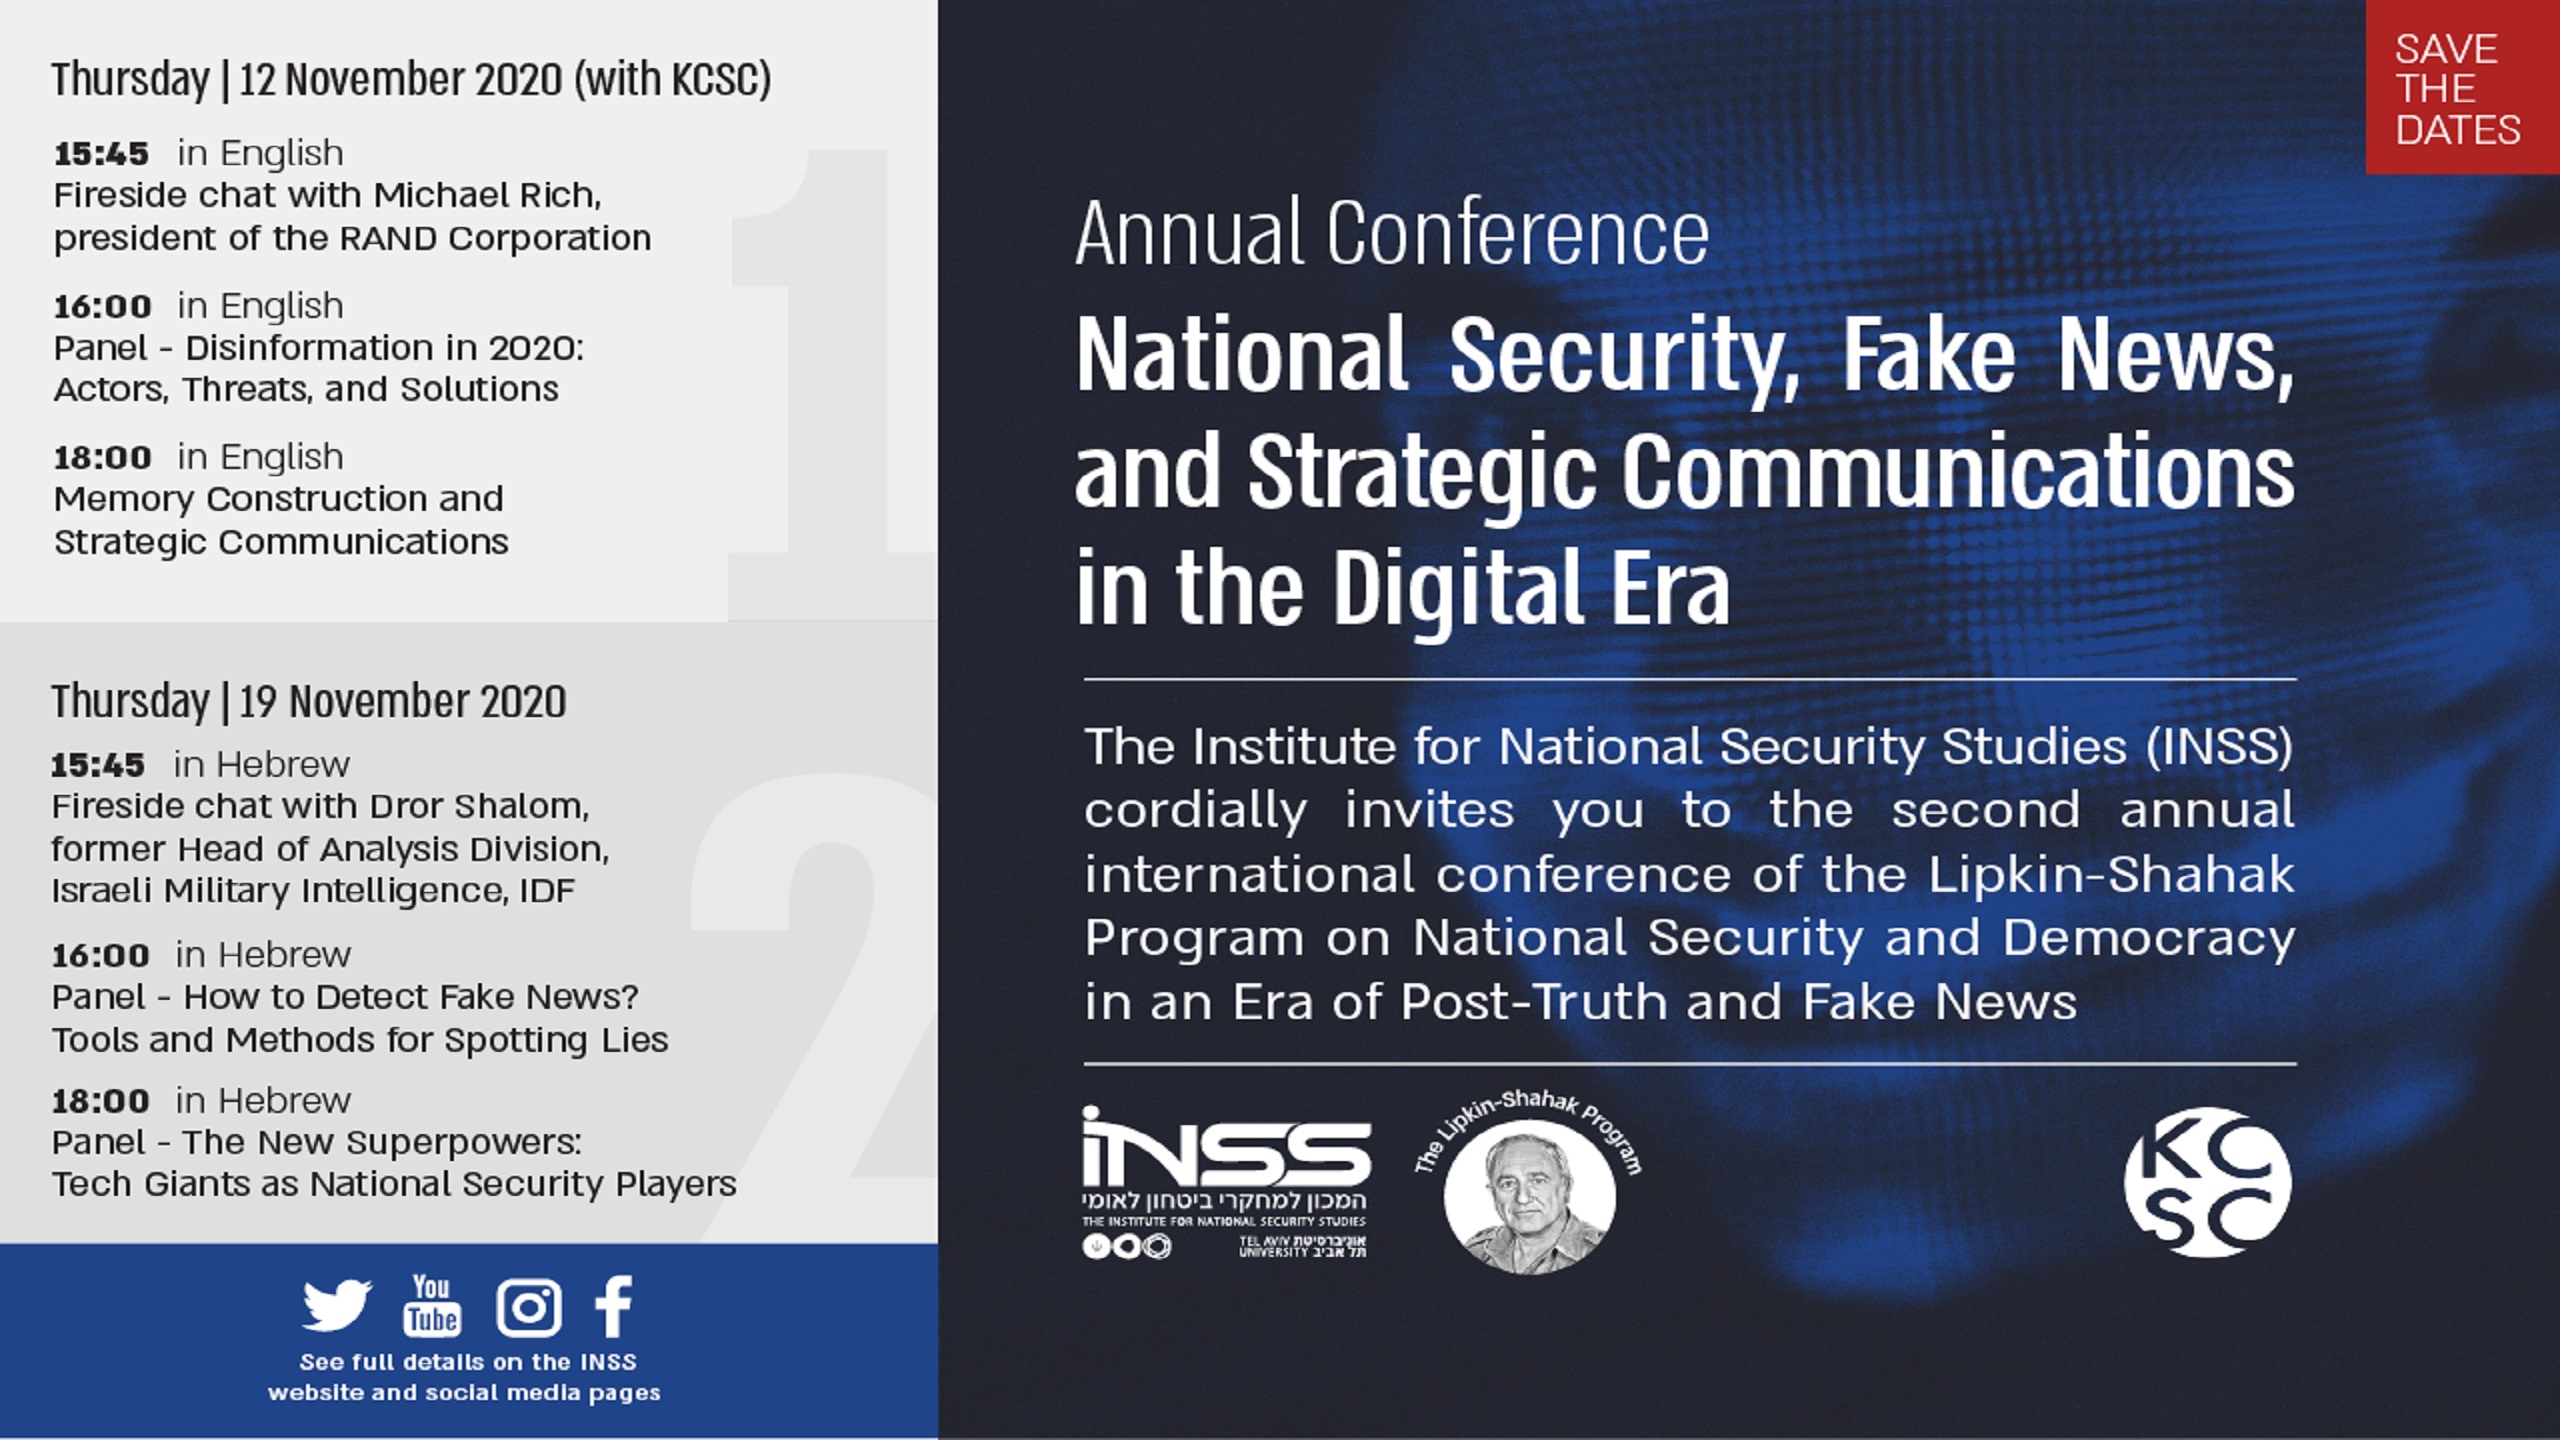 National Security, Fake News, and Strategic Communications in the Digital Era